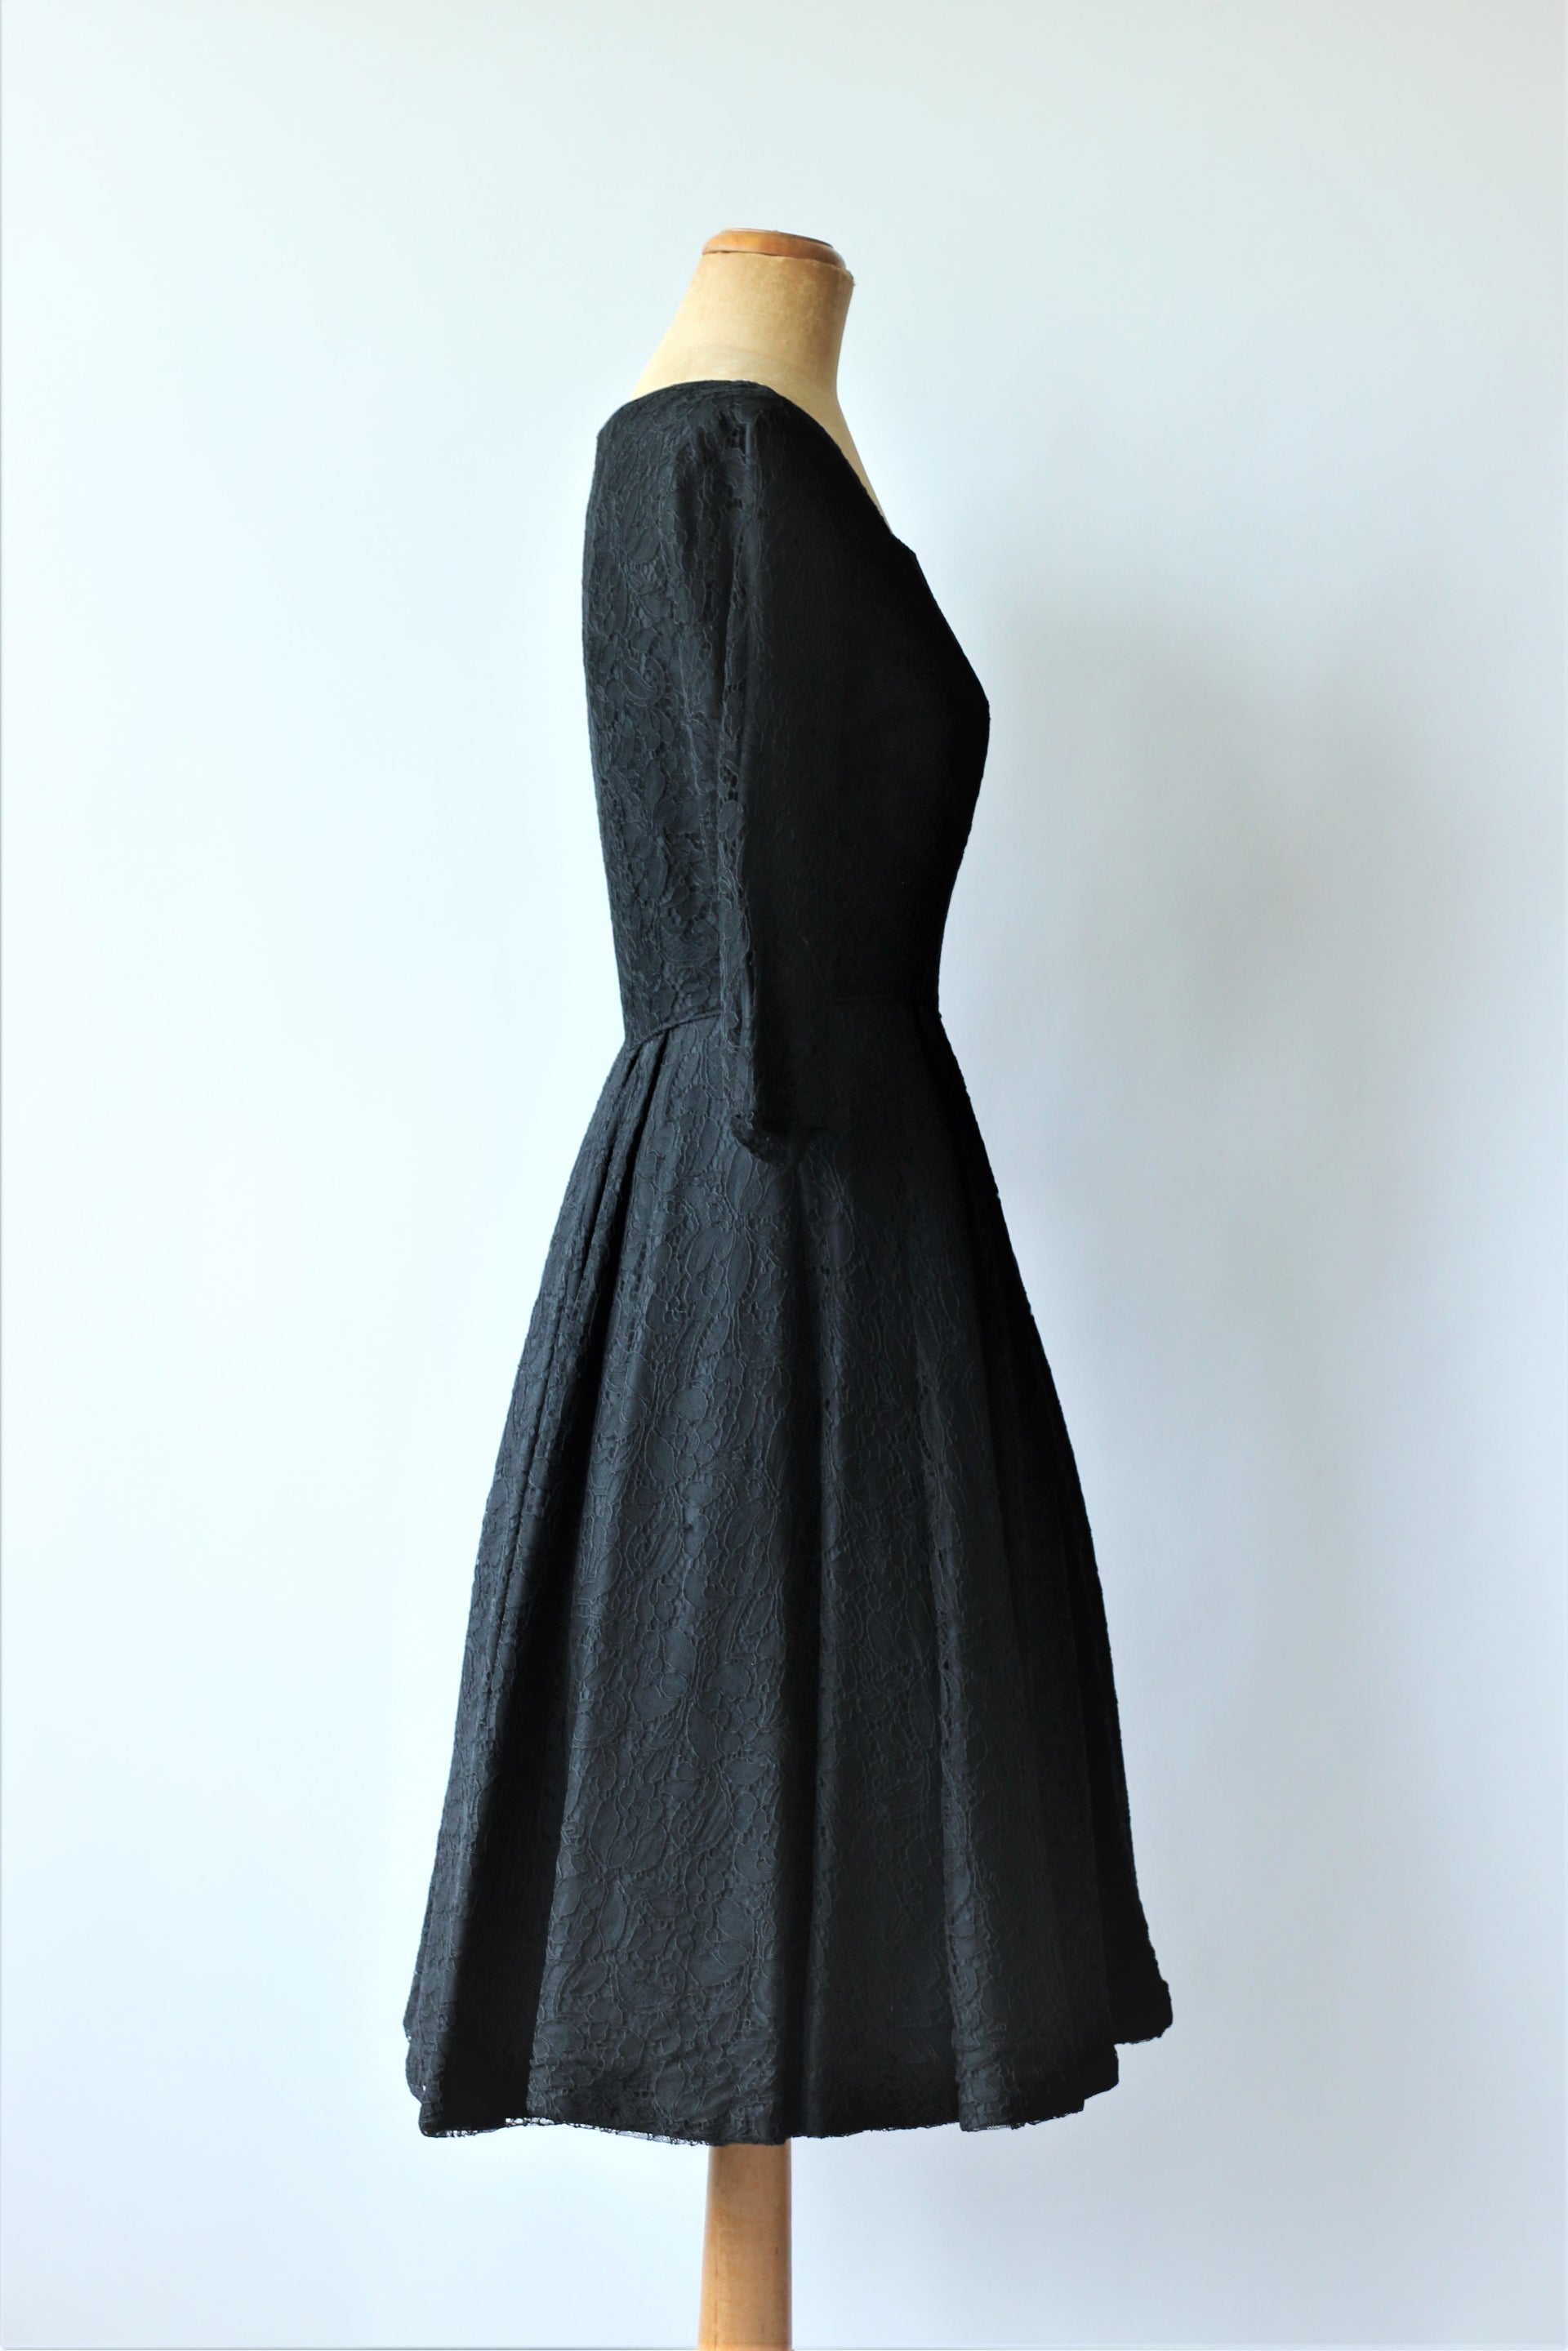 1950s Full Skirt Black Lace and Satin Dress//Size M